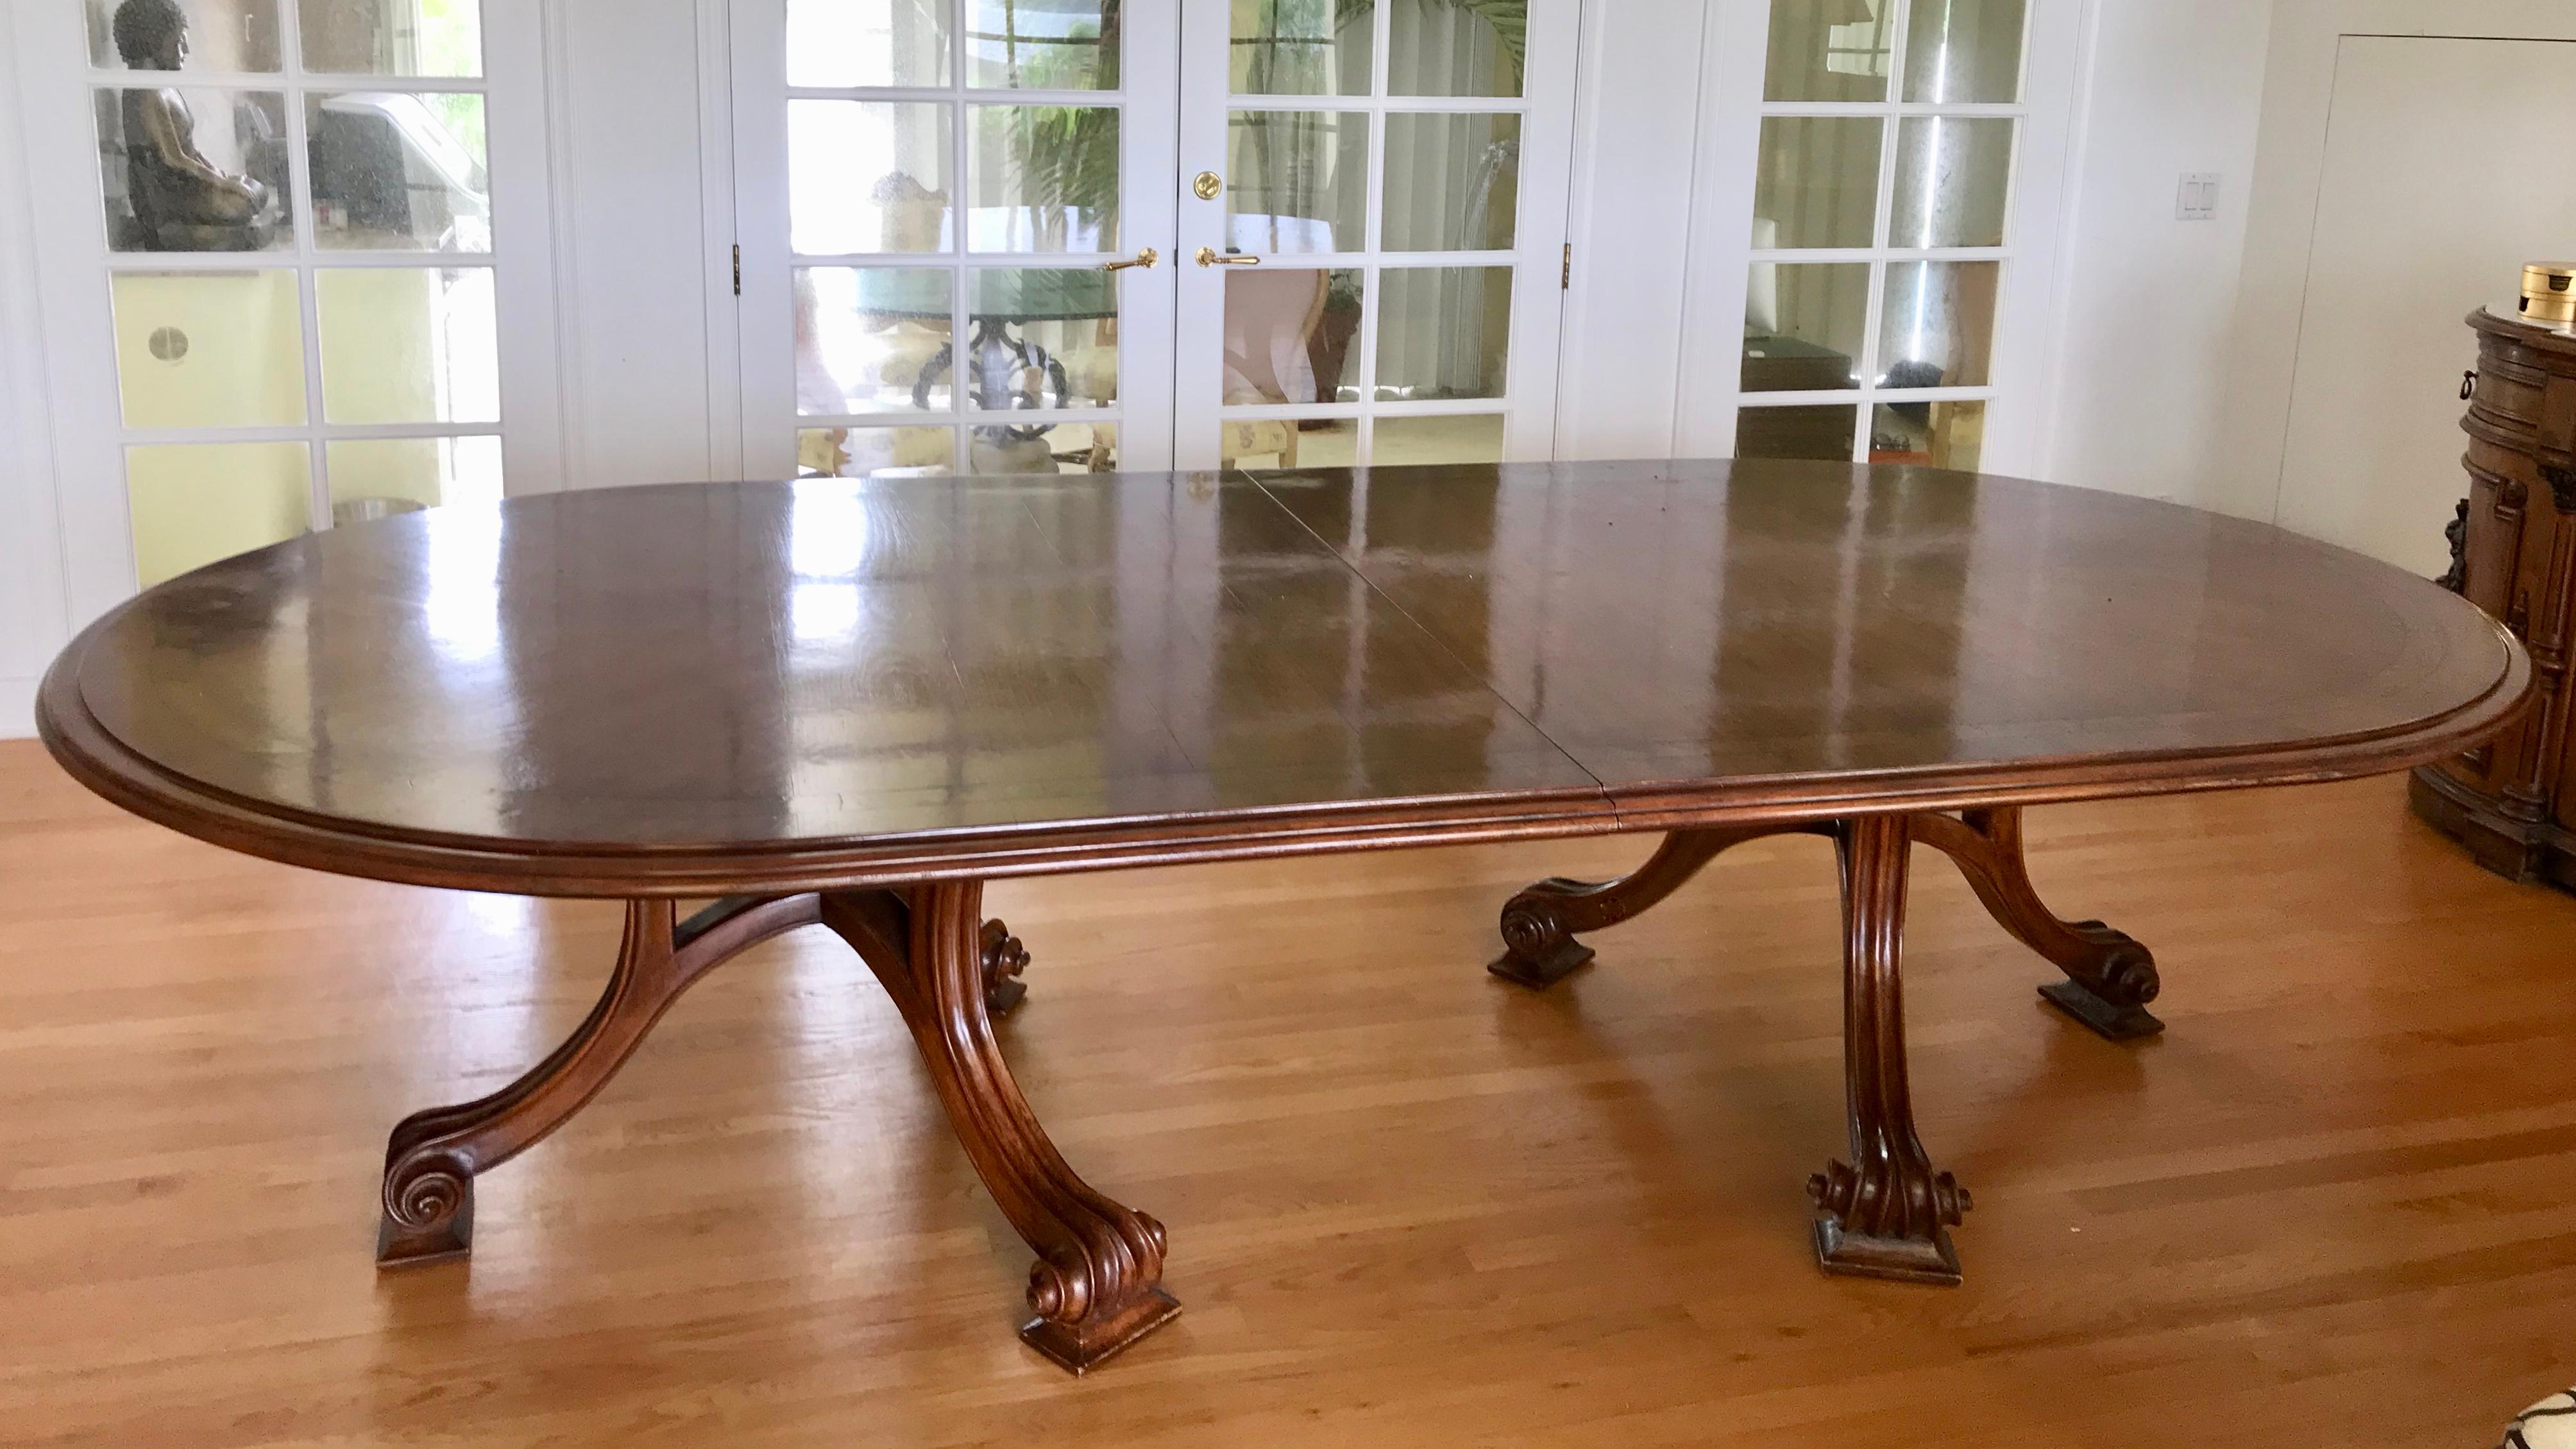 American Banquet Dining Table by Therien Studio Workshops